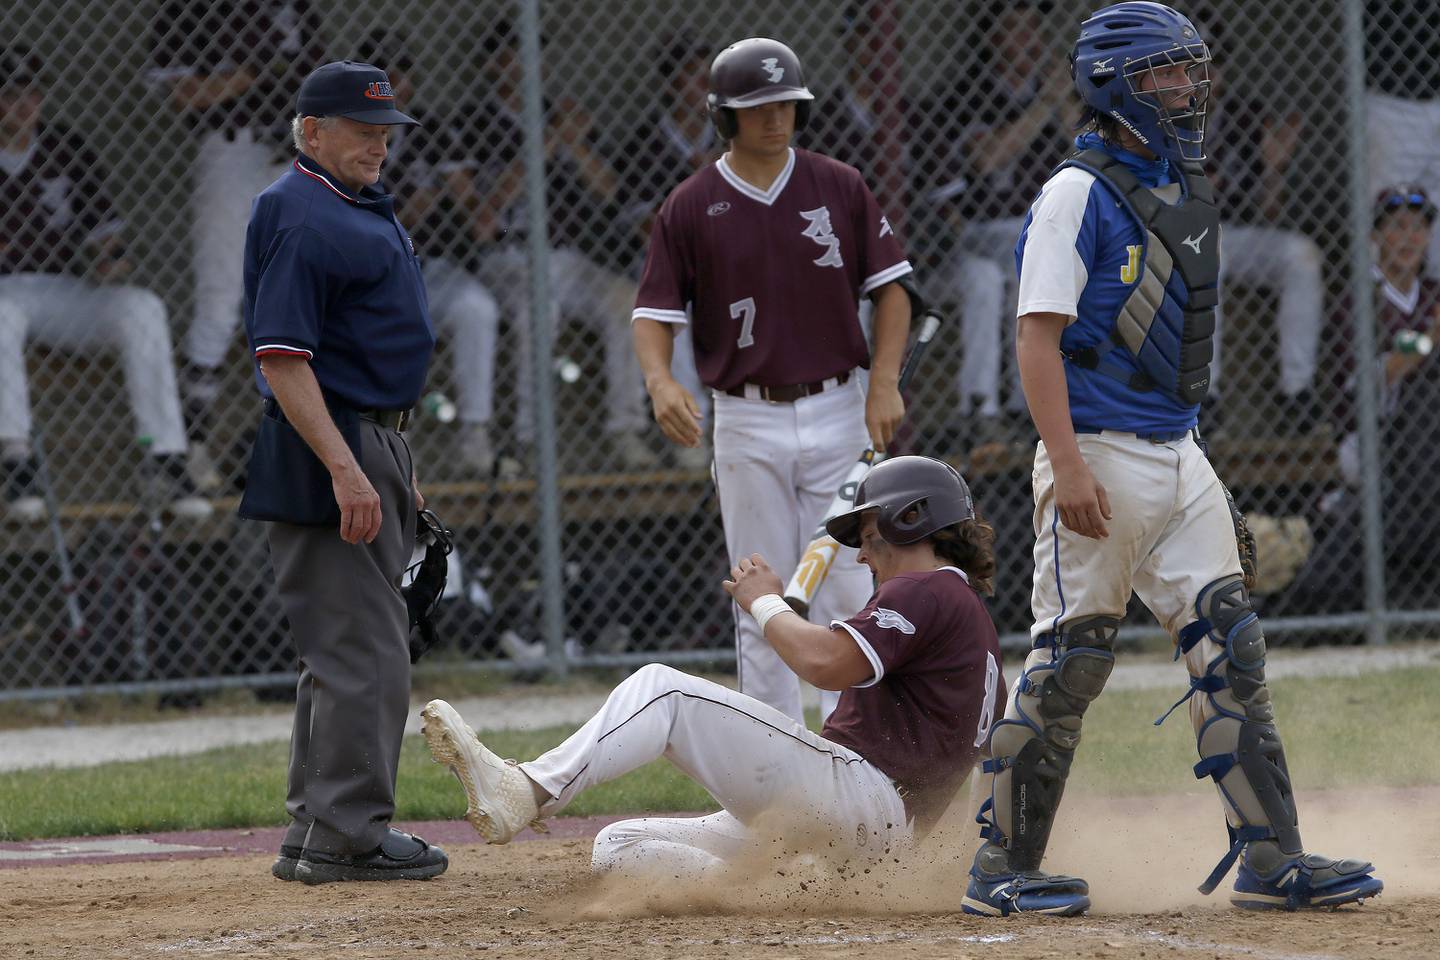 Richmond-Burton's Brock Wood slides into homeplate for a run against Johnsburg during their regional championship baseball game on Monday, June 7, 2021 in Richmond.  Richmond-Burton won 14-4 through 5 innings after a line drive basehit by Jason Miller with two outs and the bases loaded.